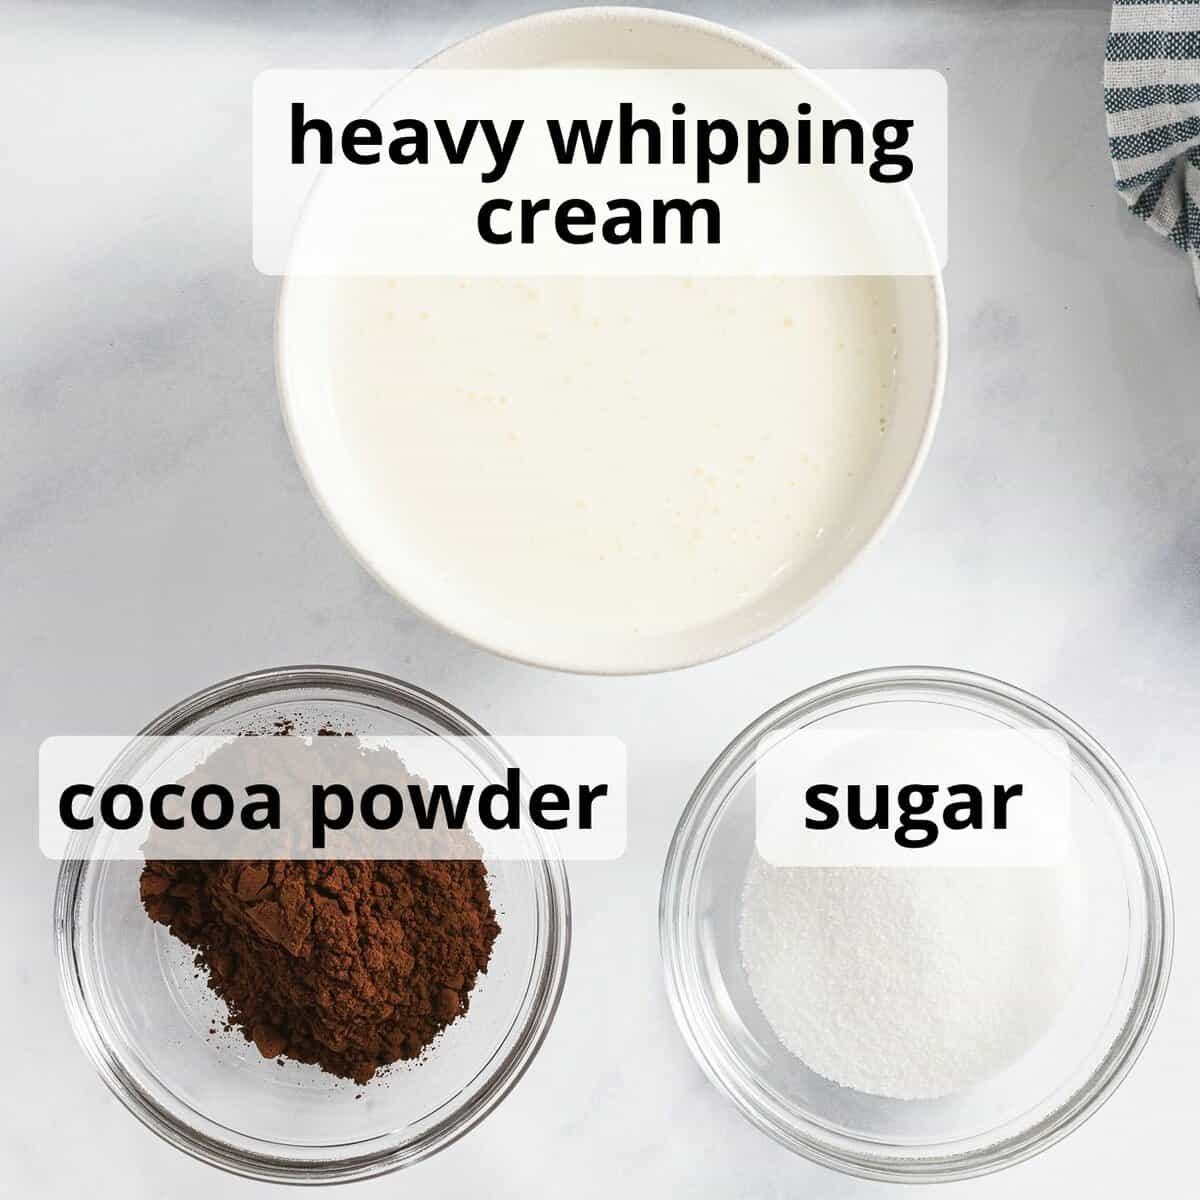 Ingredients for chocolate whipped cream including heavy whipping cream and cocoa powder.